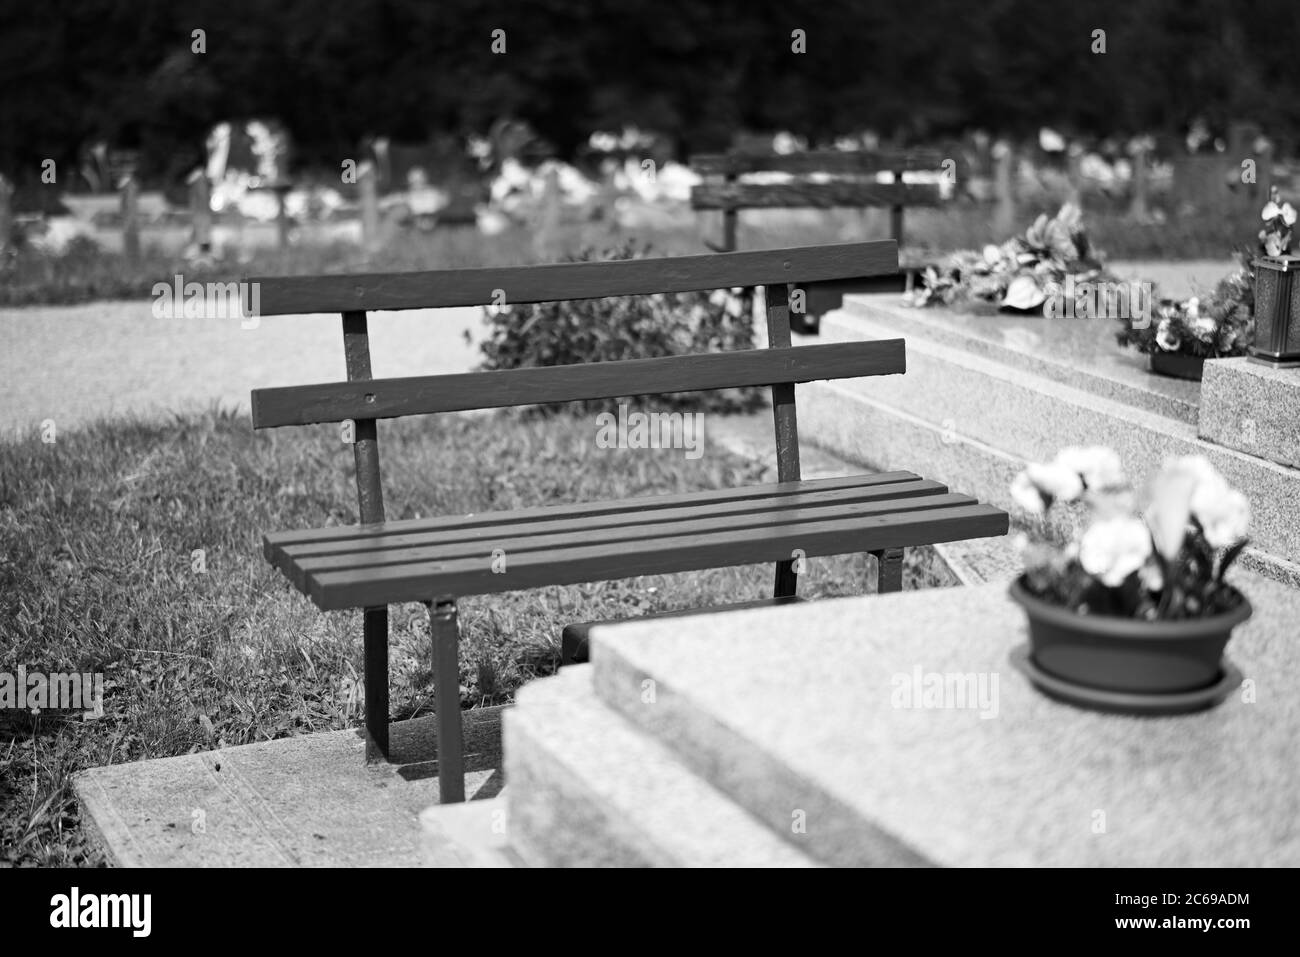 KOSICE, SLOVAKIA, 4 AUGUST 2019: A vivid red bench in front of a tomb covered by concrete block on local cemetery; very shallow depth of field. Stock Photo